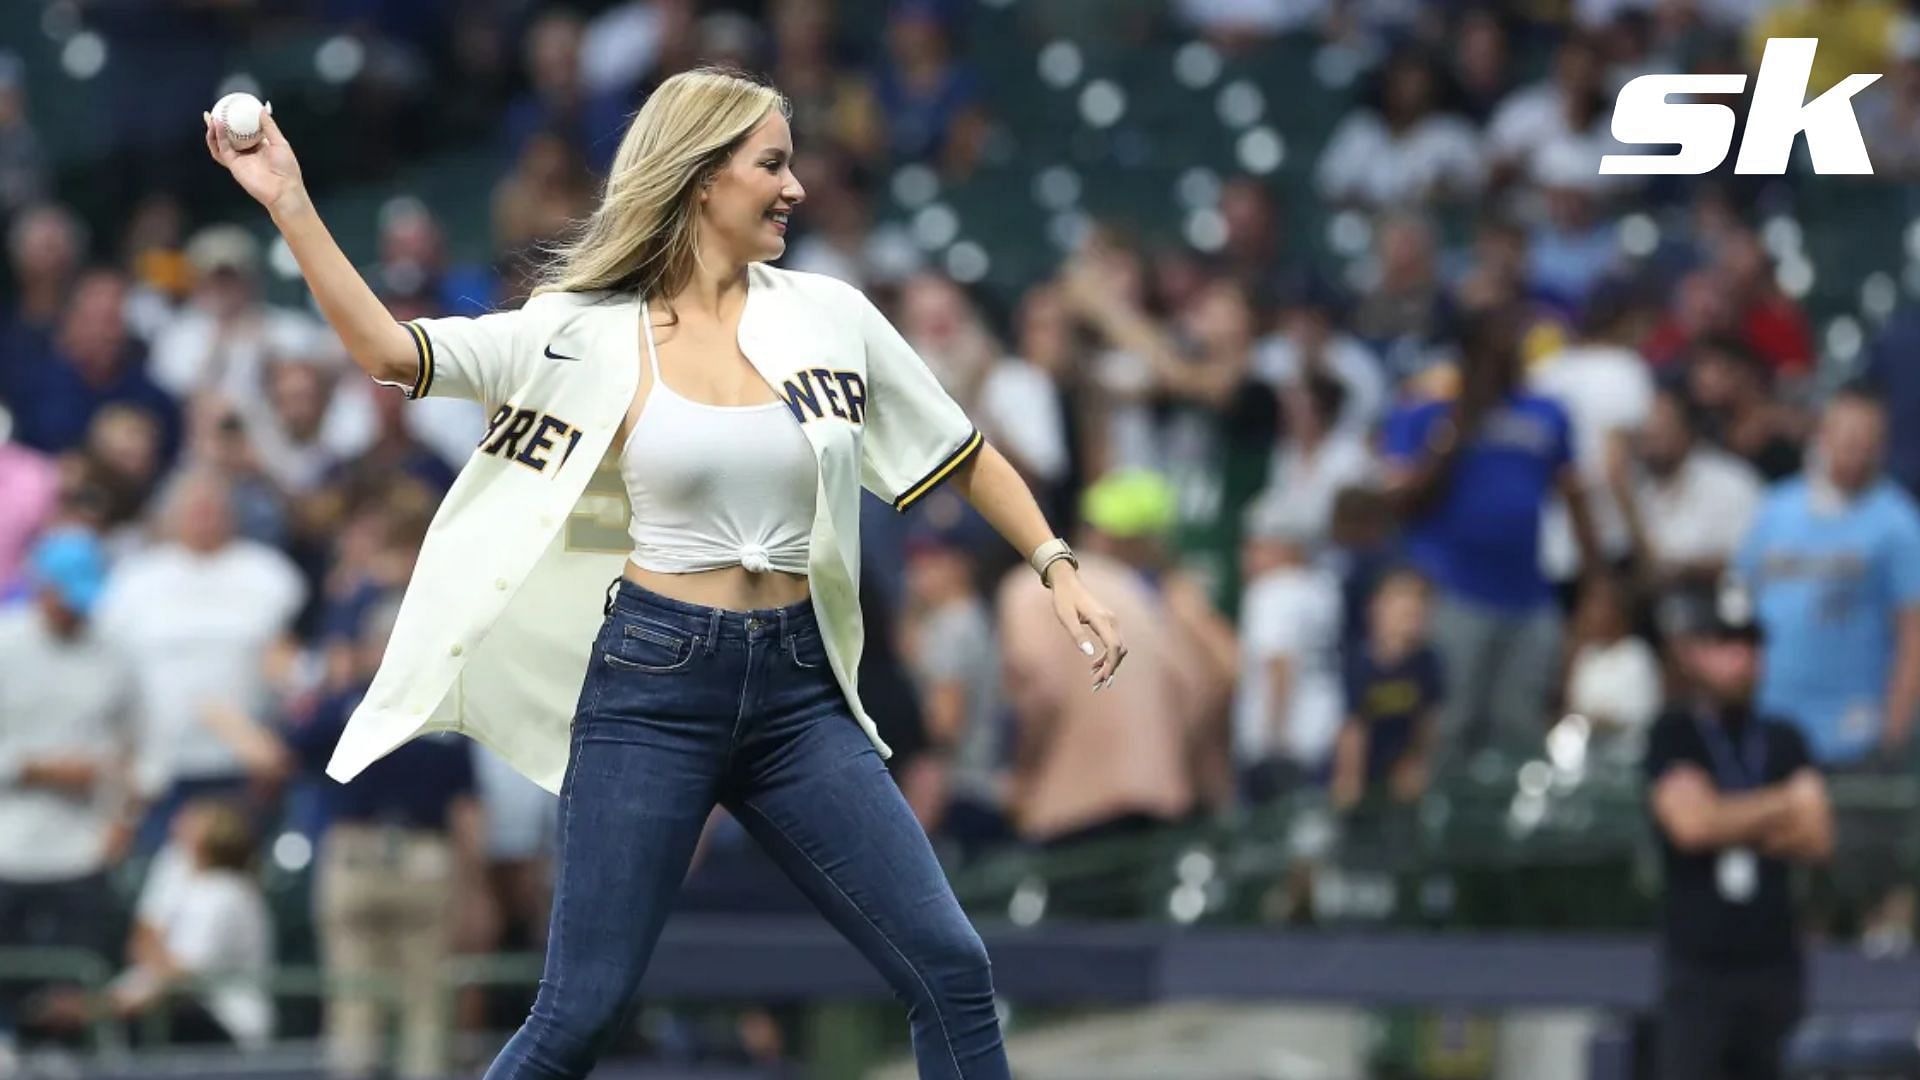 Paige Spiranac Weighs In On The Fernando Tatis Jr. PEDs Situation: “Make  Steroids Legal”